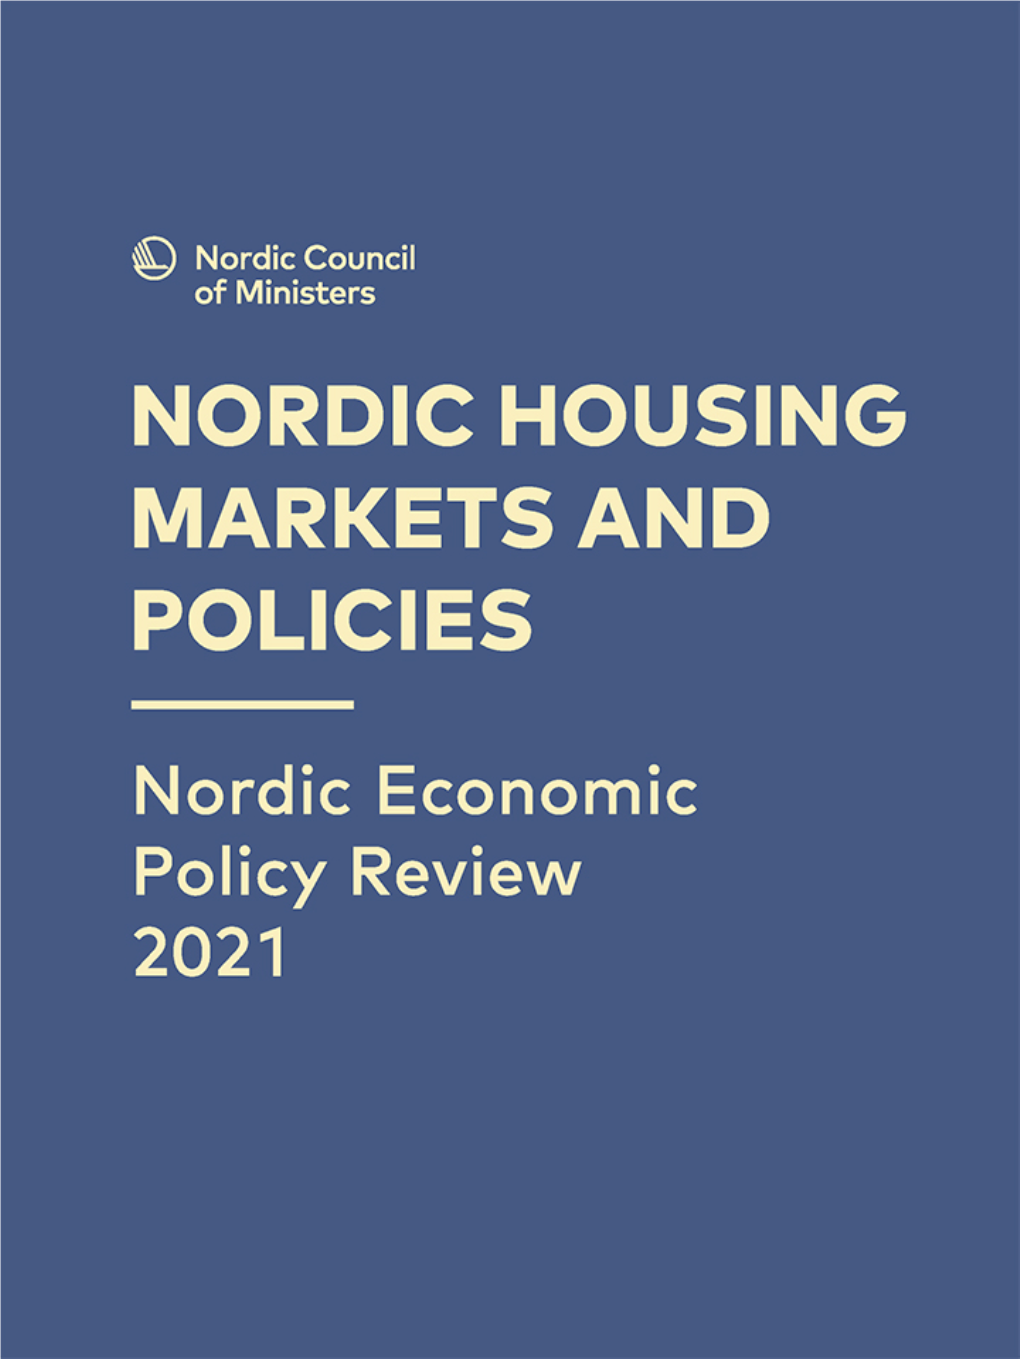 NORDIC HOUSING MARKETS and POLICIES: Nordic Economic Policy Review 2021